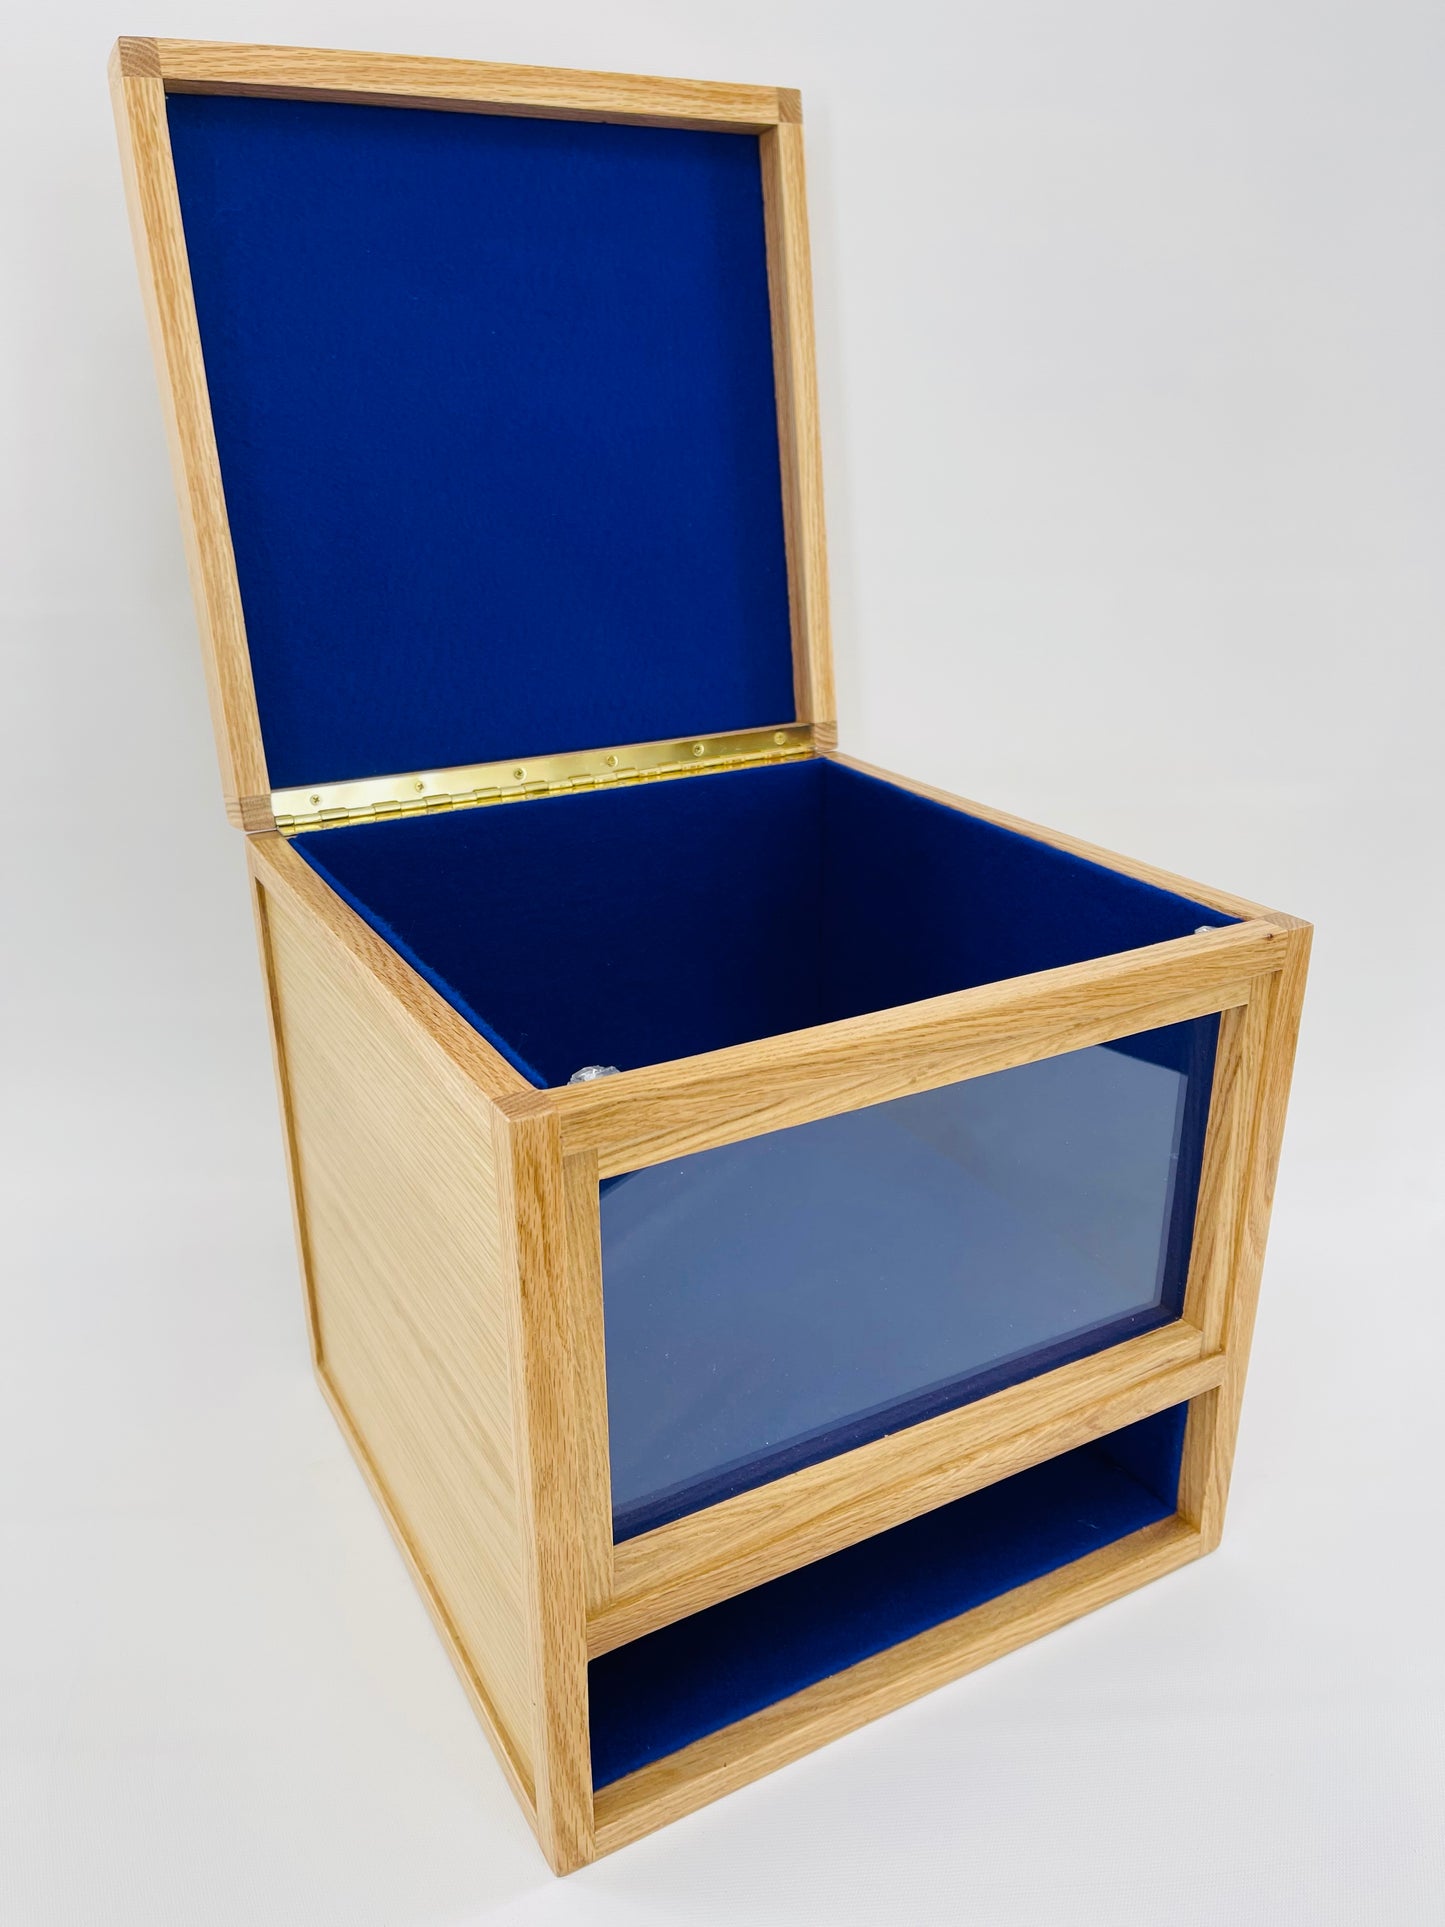 Plans of Hat box with glass front and shelf - TreeToBox